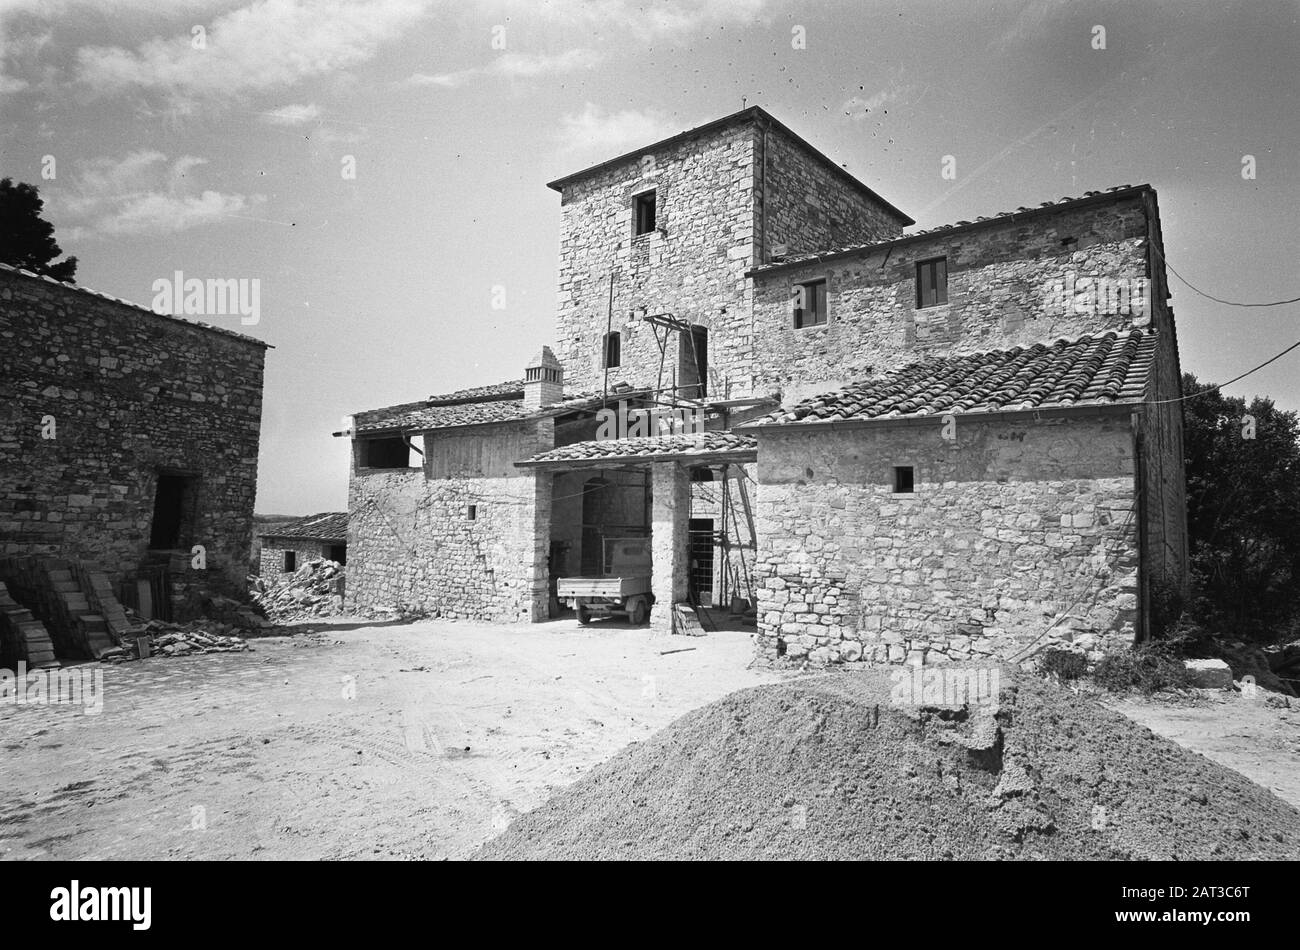 New holiday accommodation in Tavarnelle Valdi Pesa of Beatrix and Claus  The holiday residence; an old farmhouse with driveway Date: 23 July 1975 Location: Italy, Tavarnelle Valdi Pesa Keywords: farms, holiday homes Stock Photo